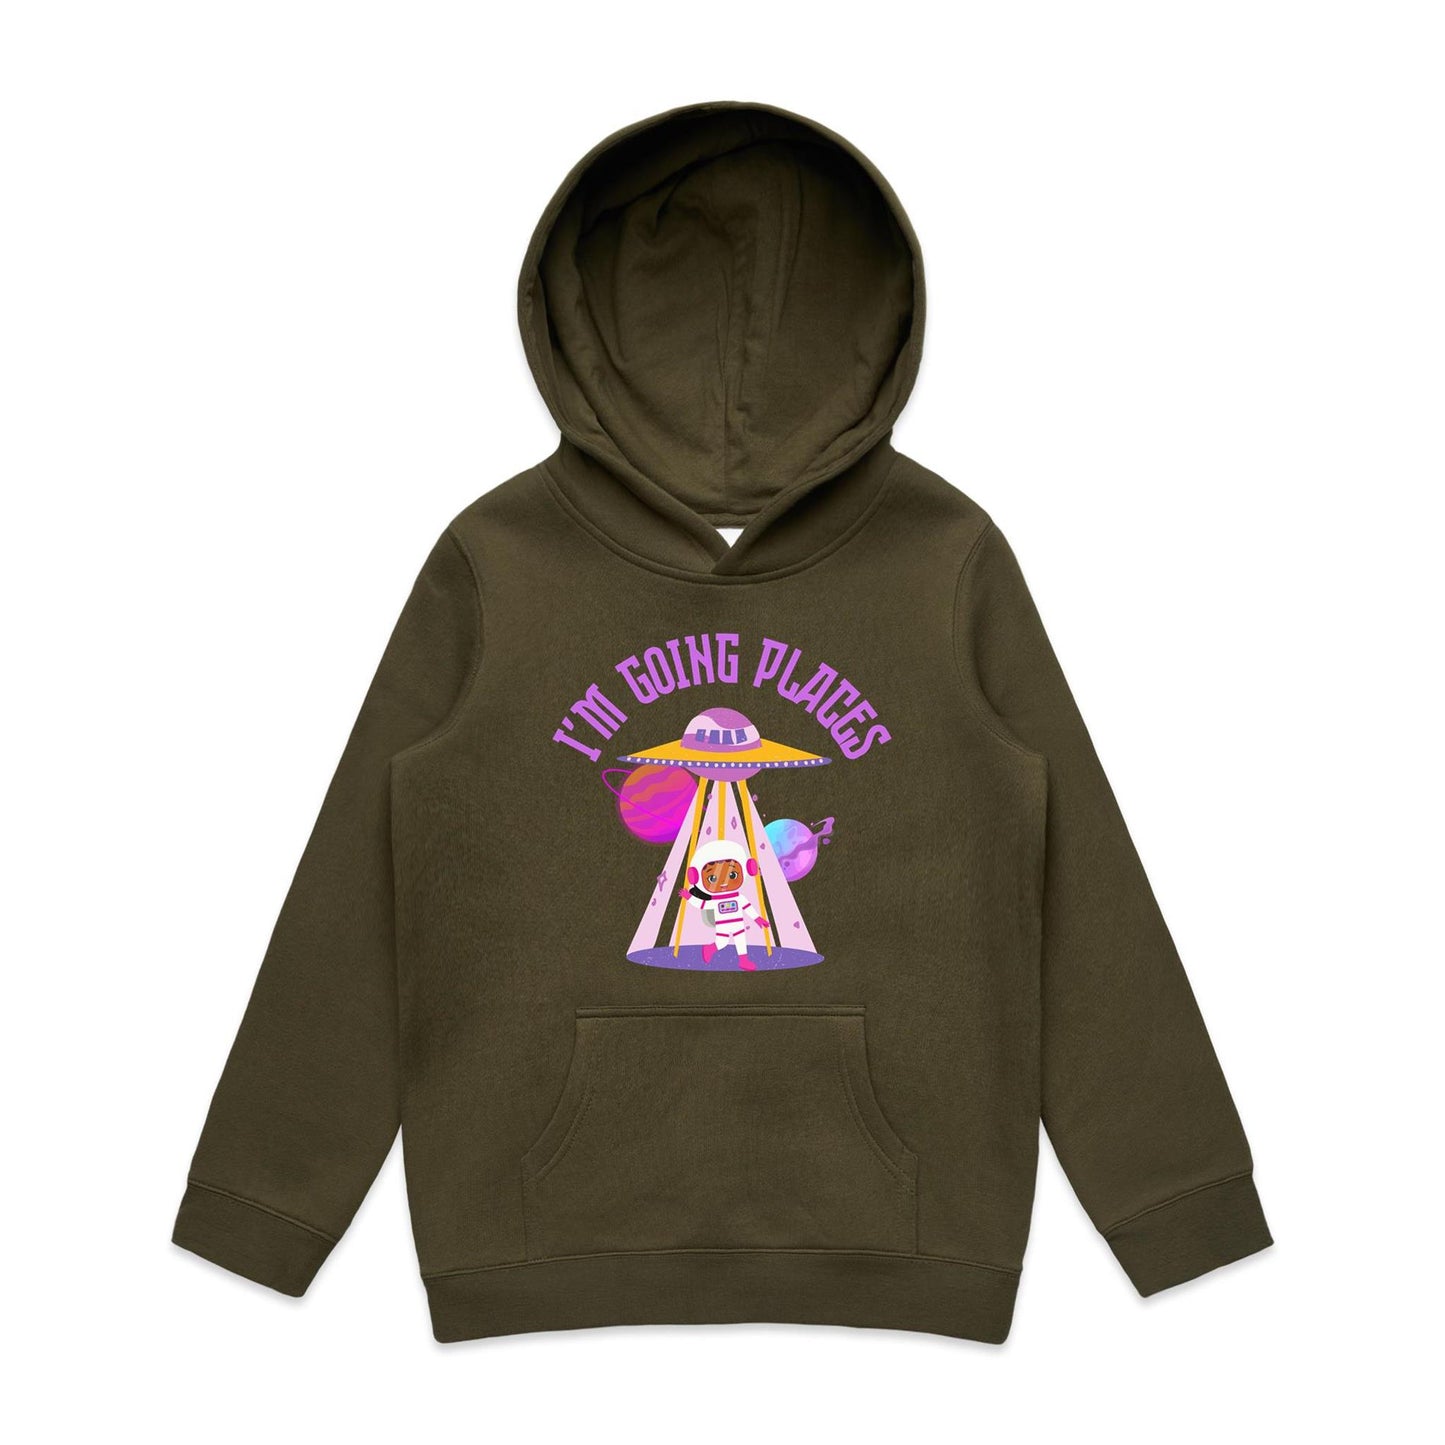 UFO, I'm Going Places - Youth Supply Hood Army Kids Hoodie Sci Fi